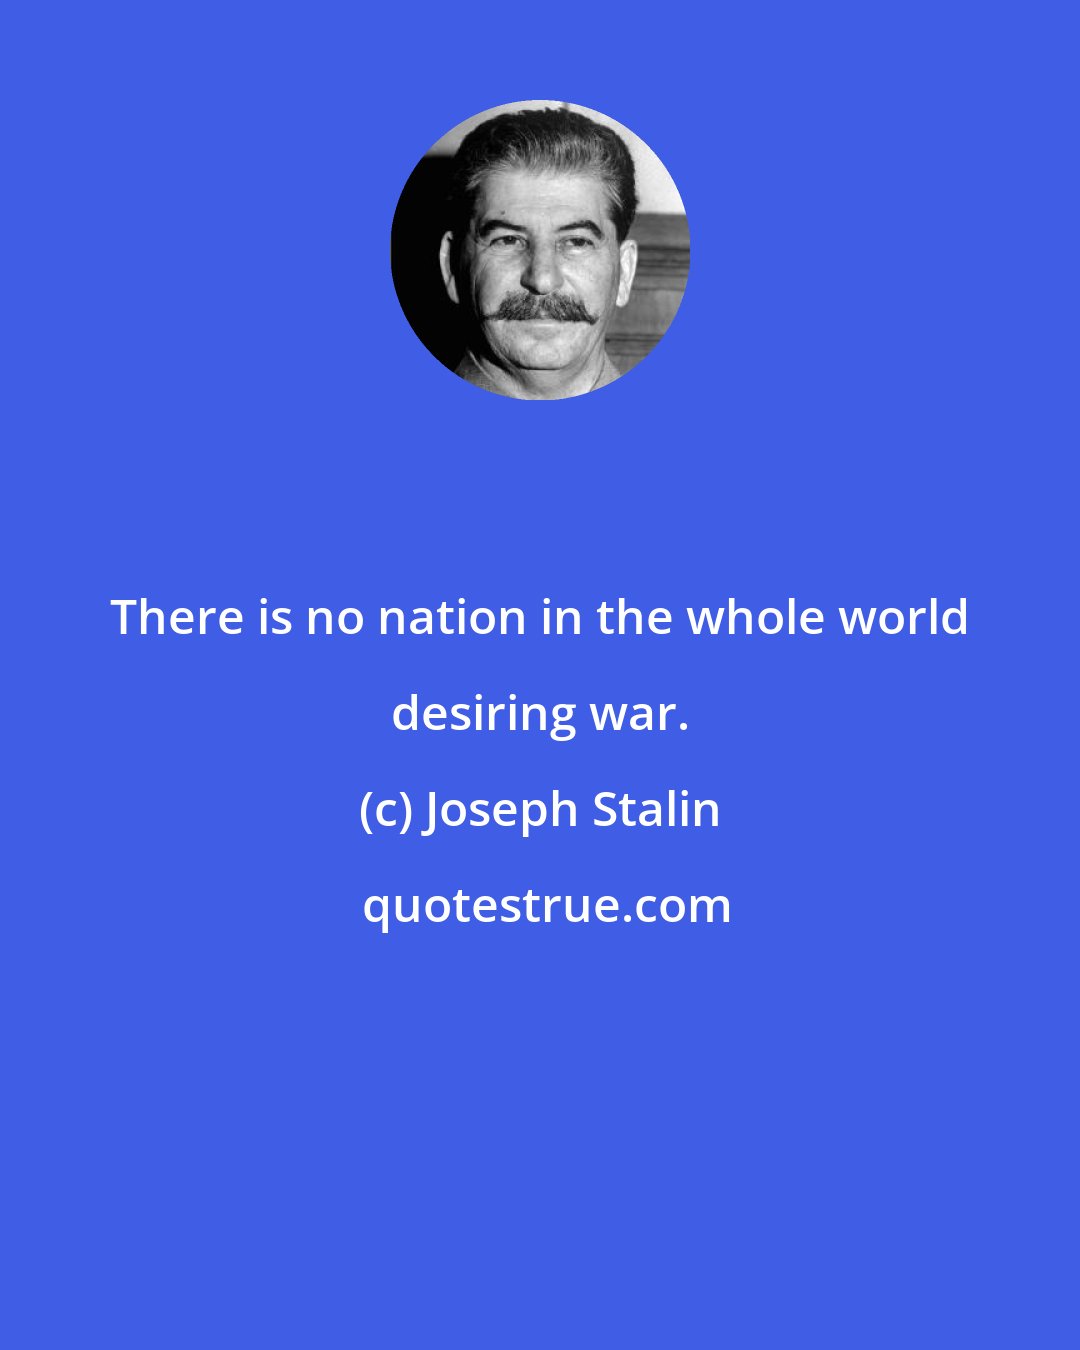 Joseph Stalin: There is no nation in the whole world desiring war.